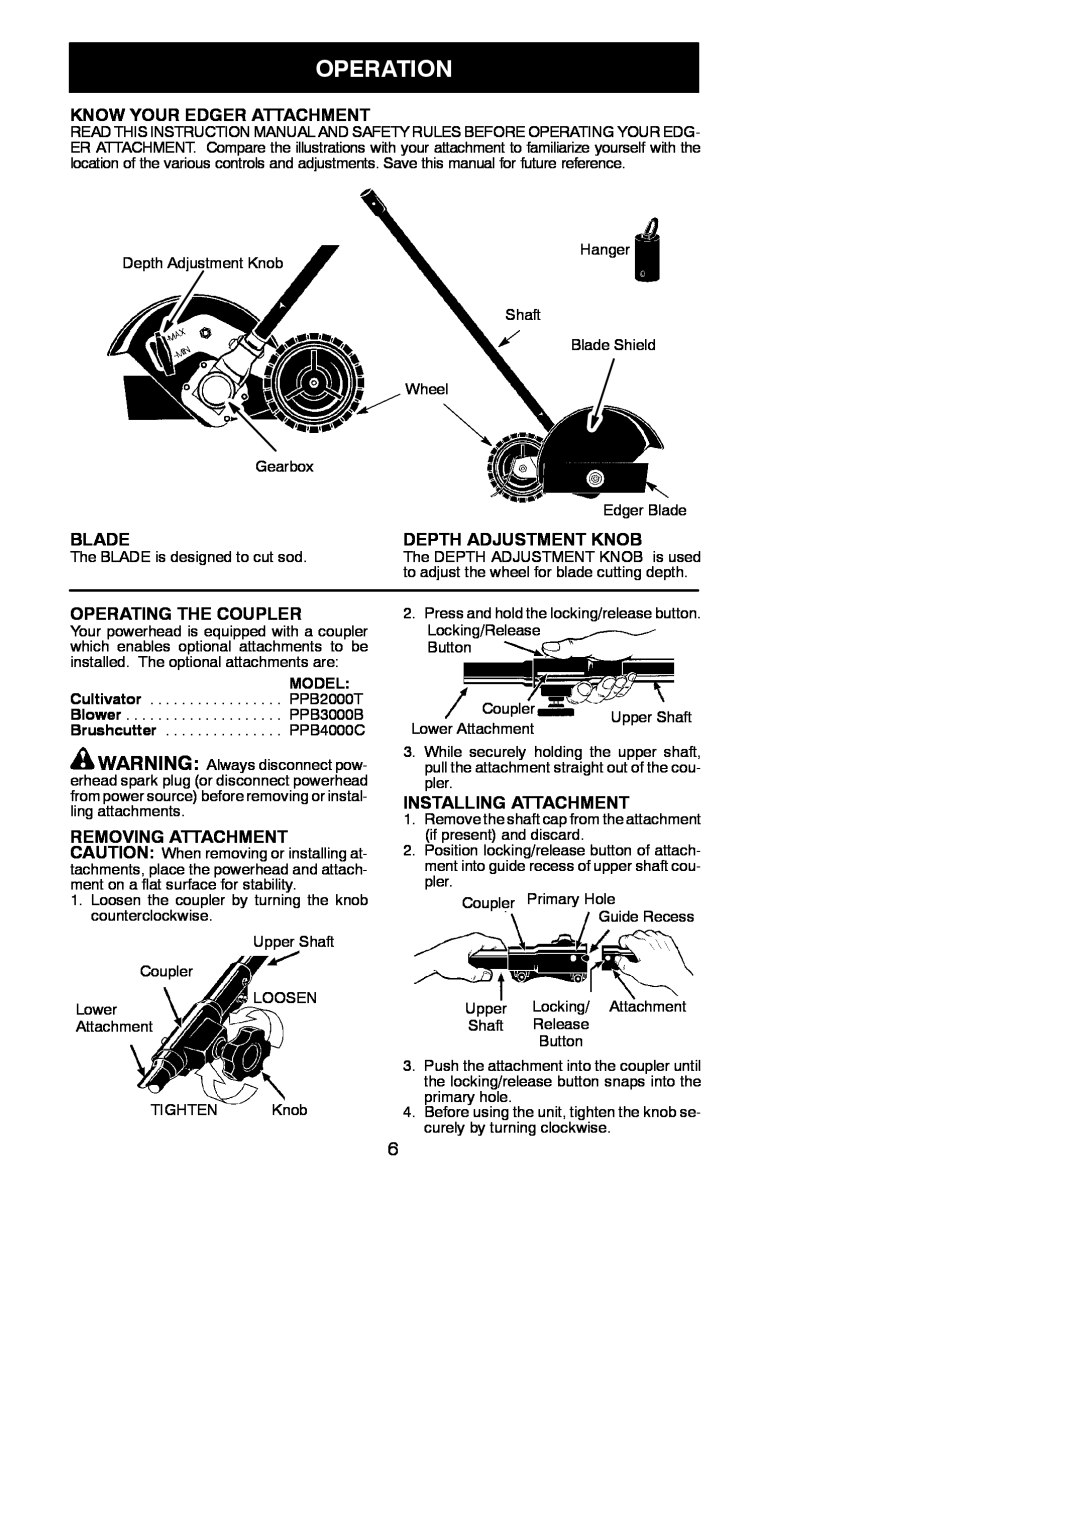 Poulan 530164267 Operation, Know Your Edger Attachment, Blade, Depth Adjustment Knob, Operating The Coupler, Model 